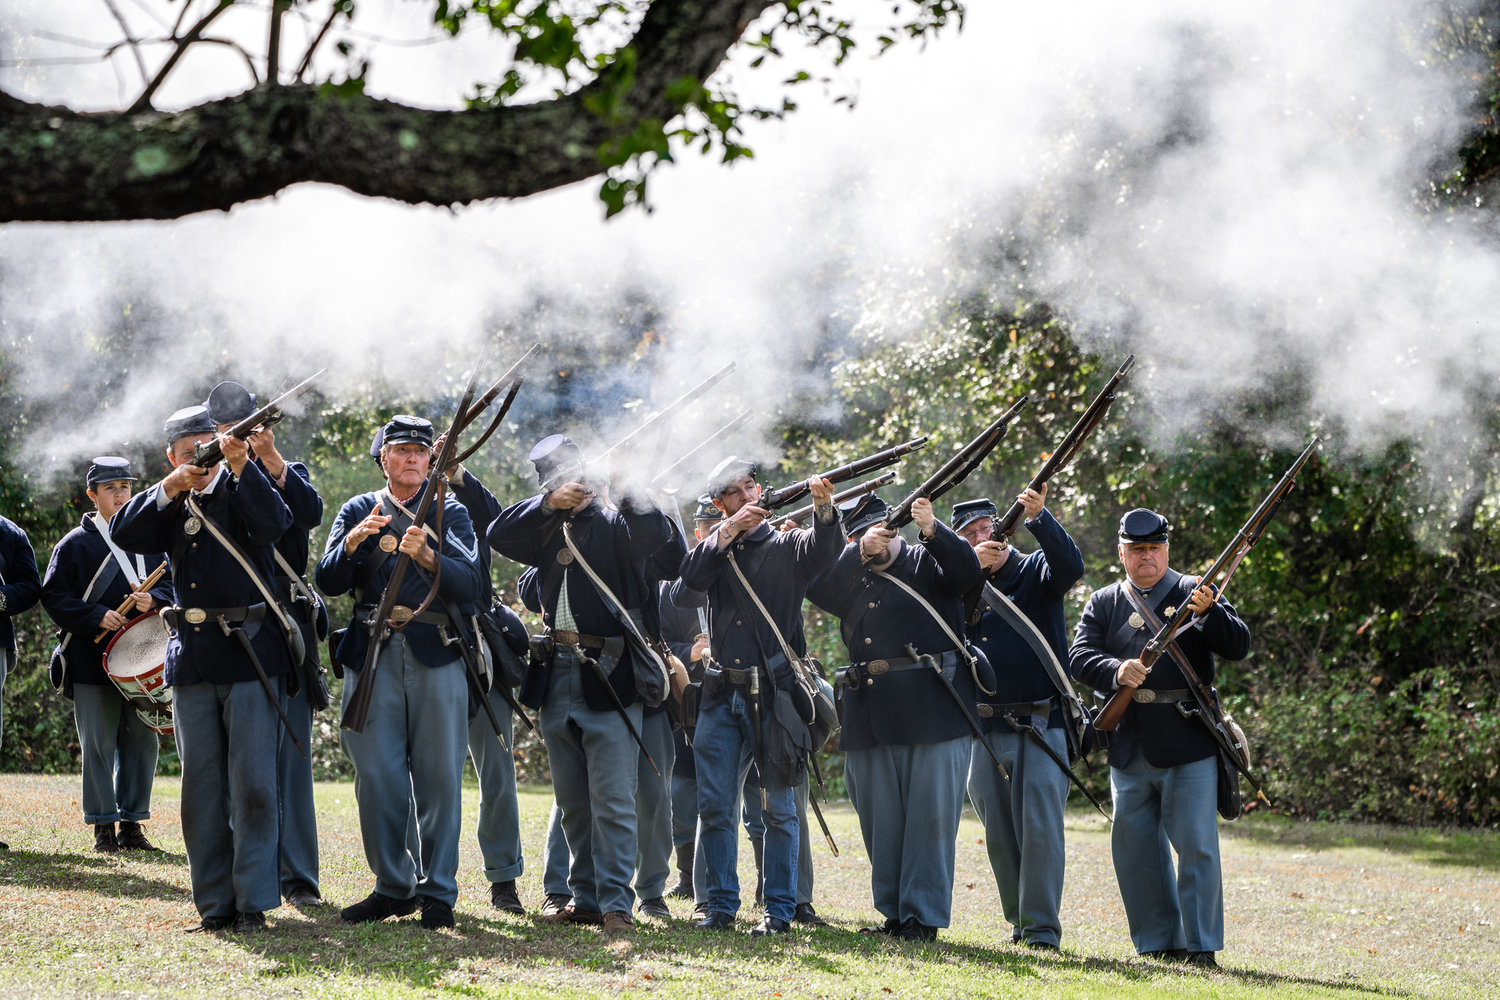 This past weekend, Oct. 16 and 17, the 13th annual Civil War Weekend was held at the Grange in Sayville. The event was a completely immersive experience that transported visitors back in time to both Union and Confederate camps.